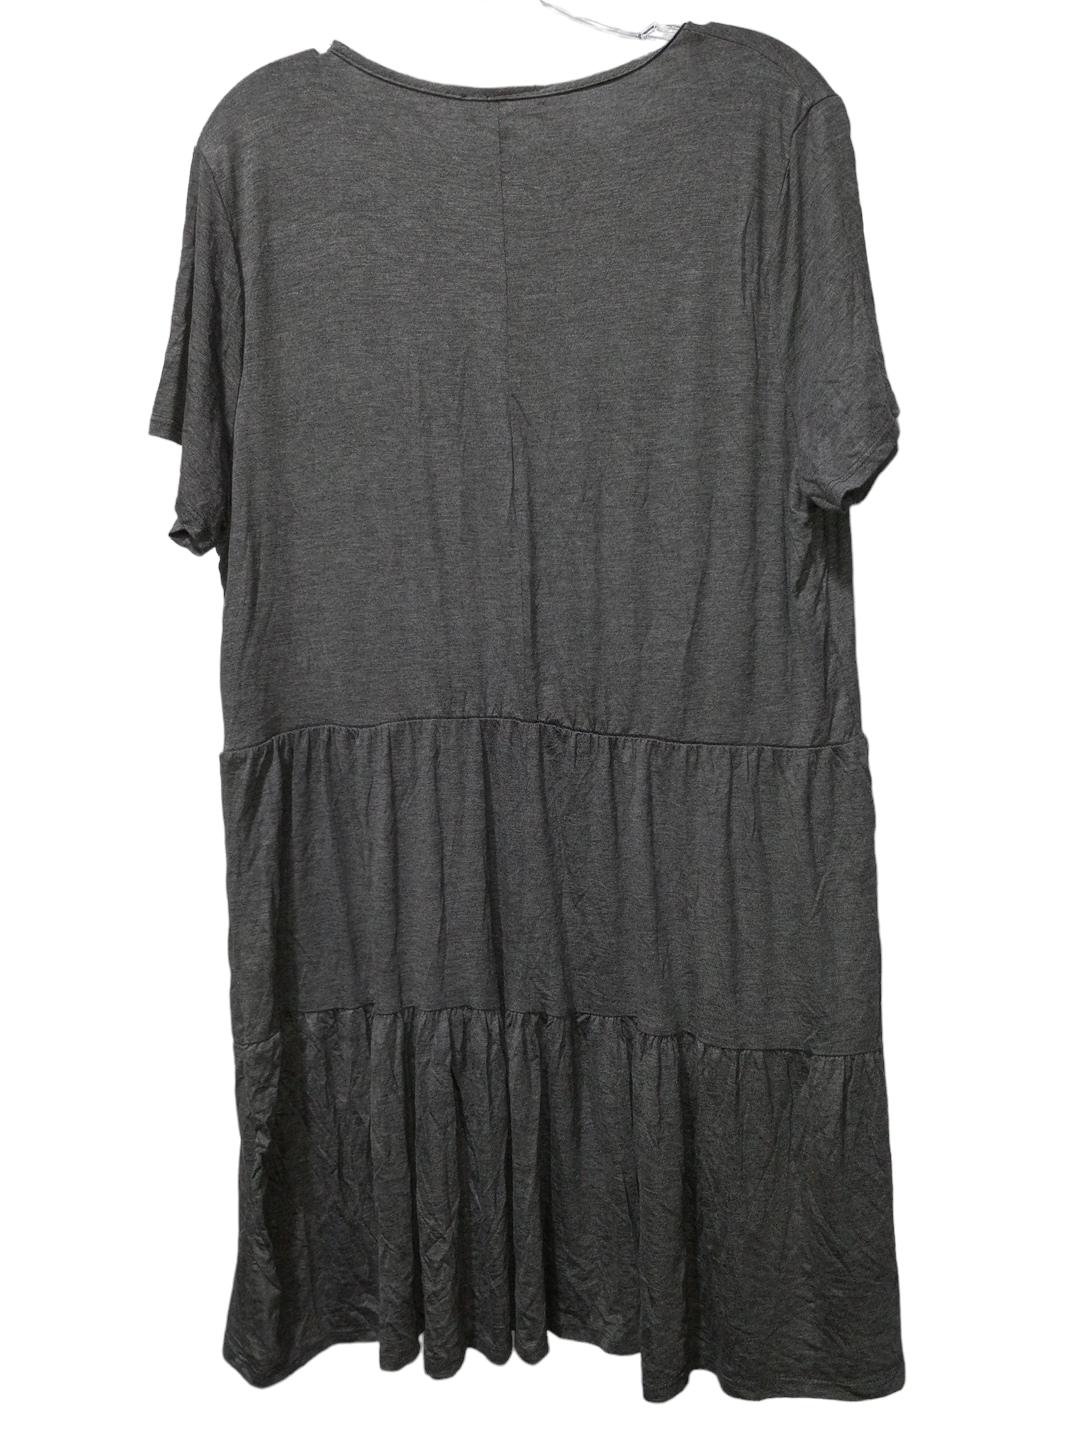 Grey Dress Casual Short Forever, Size 3x